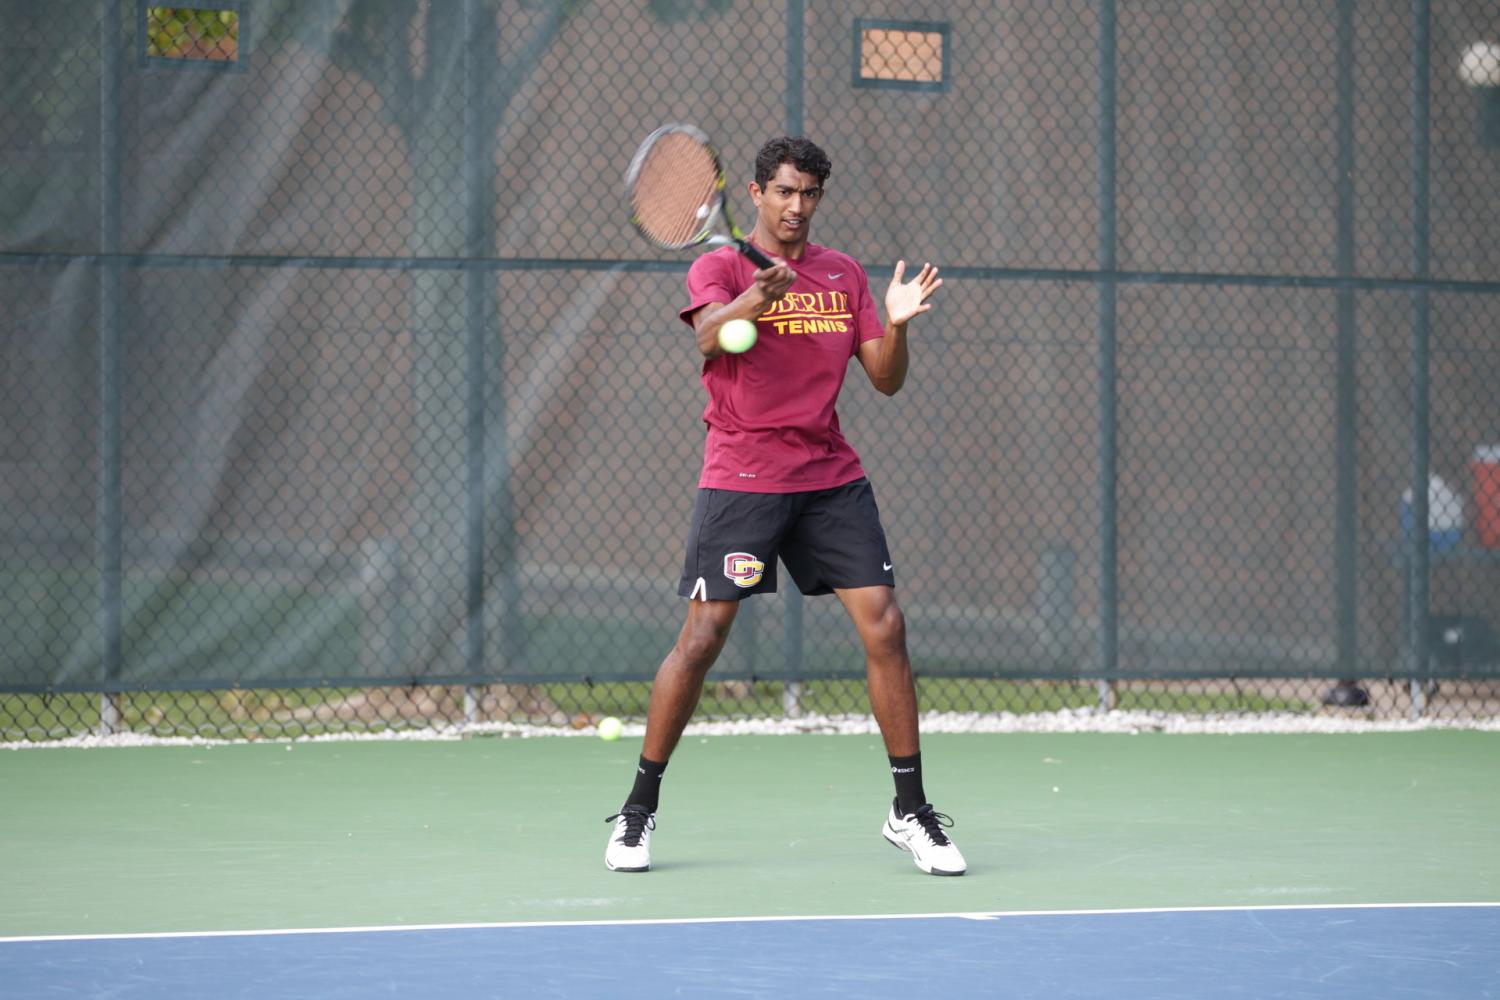 Junior Manickam Manickam completes a forehand follow-through. The Yeomen completed their season with a 5–2 victory over Denison University in the third-place match of the NCAC Tournament.